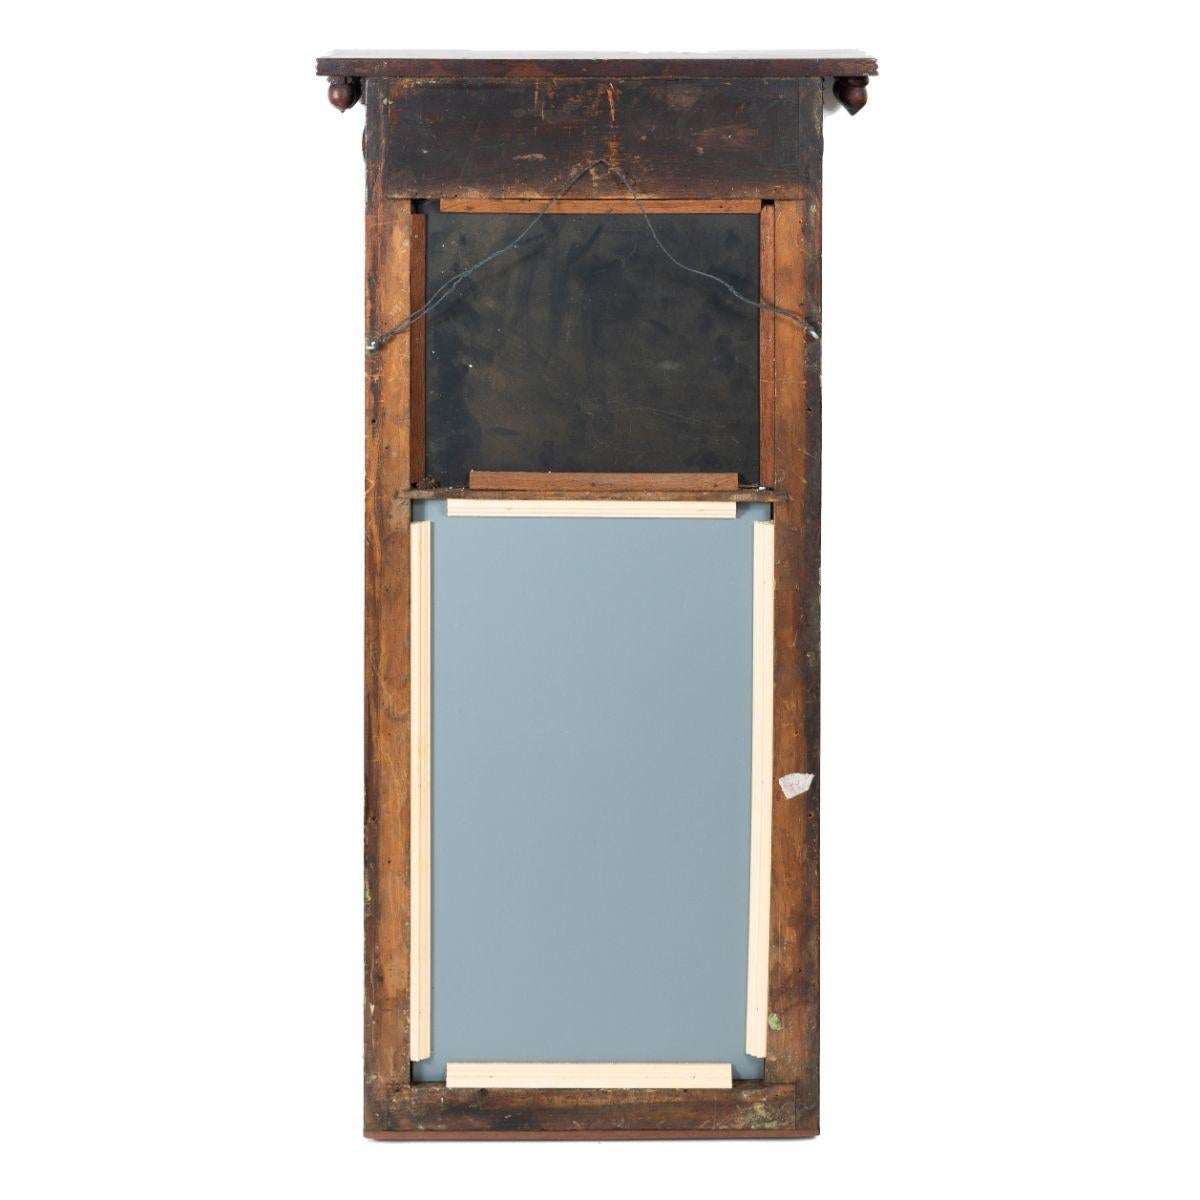 Early 19th Century American Mahogany Tabernacle Pier Mirror In Good Condition For Sale In Kenilworth, IL